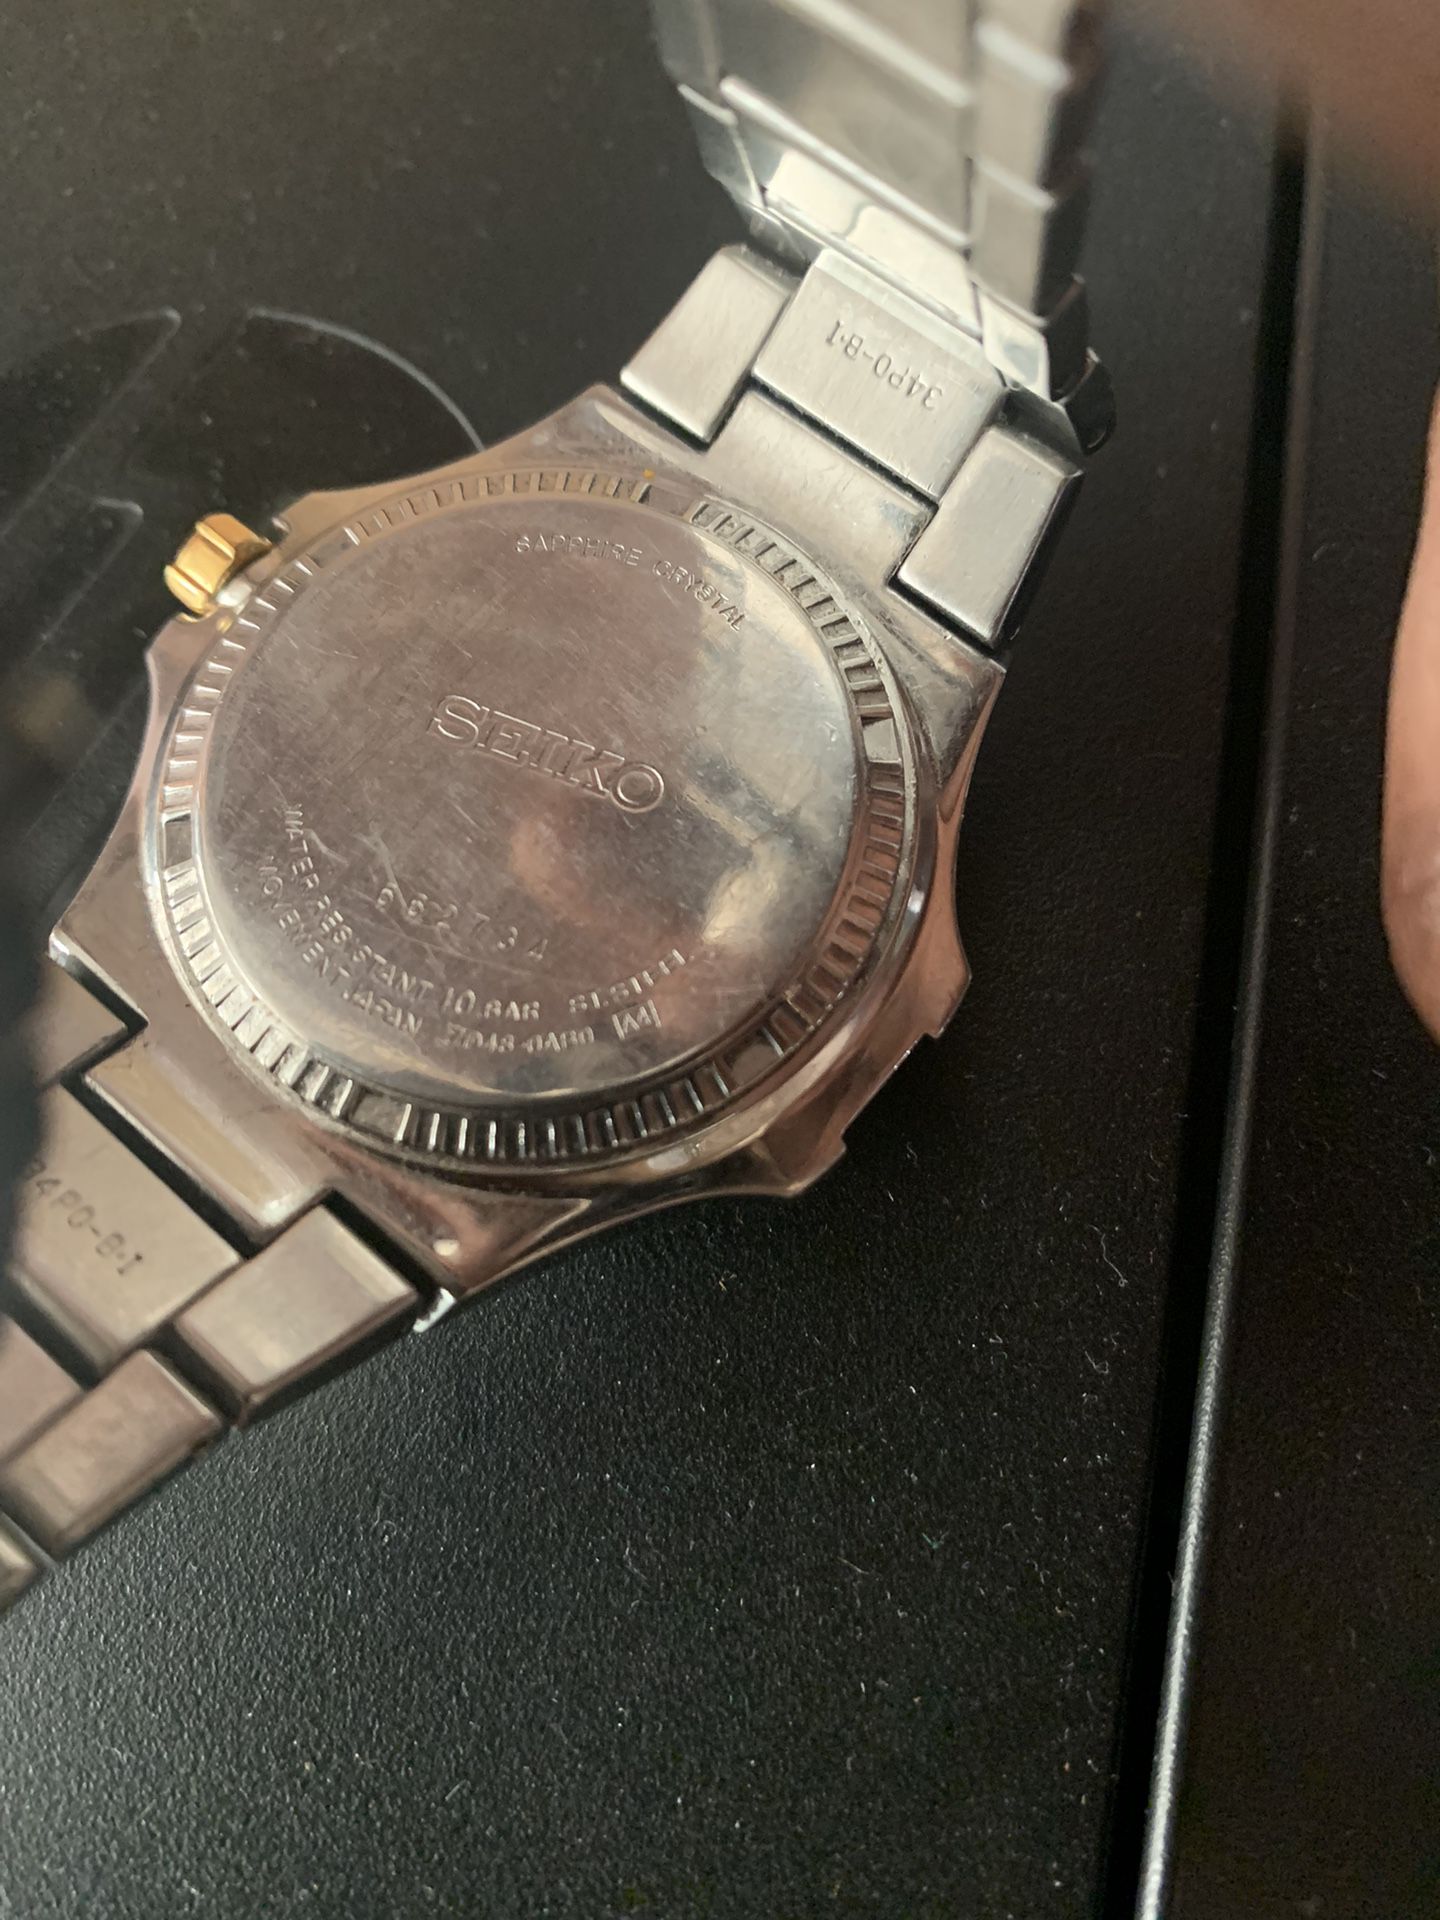 Seiko Coutura Kinetic Perpetual Watch for Sale in Philadelphia, PA - OfferUp